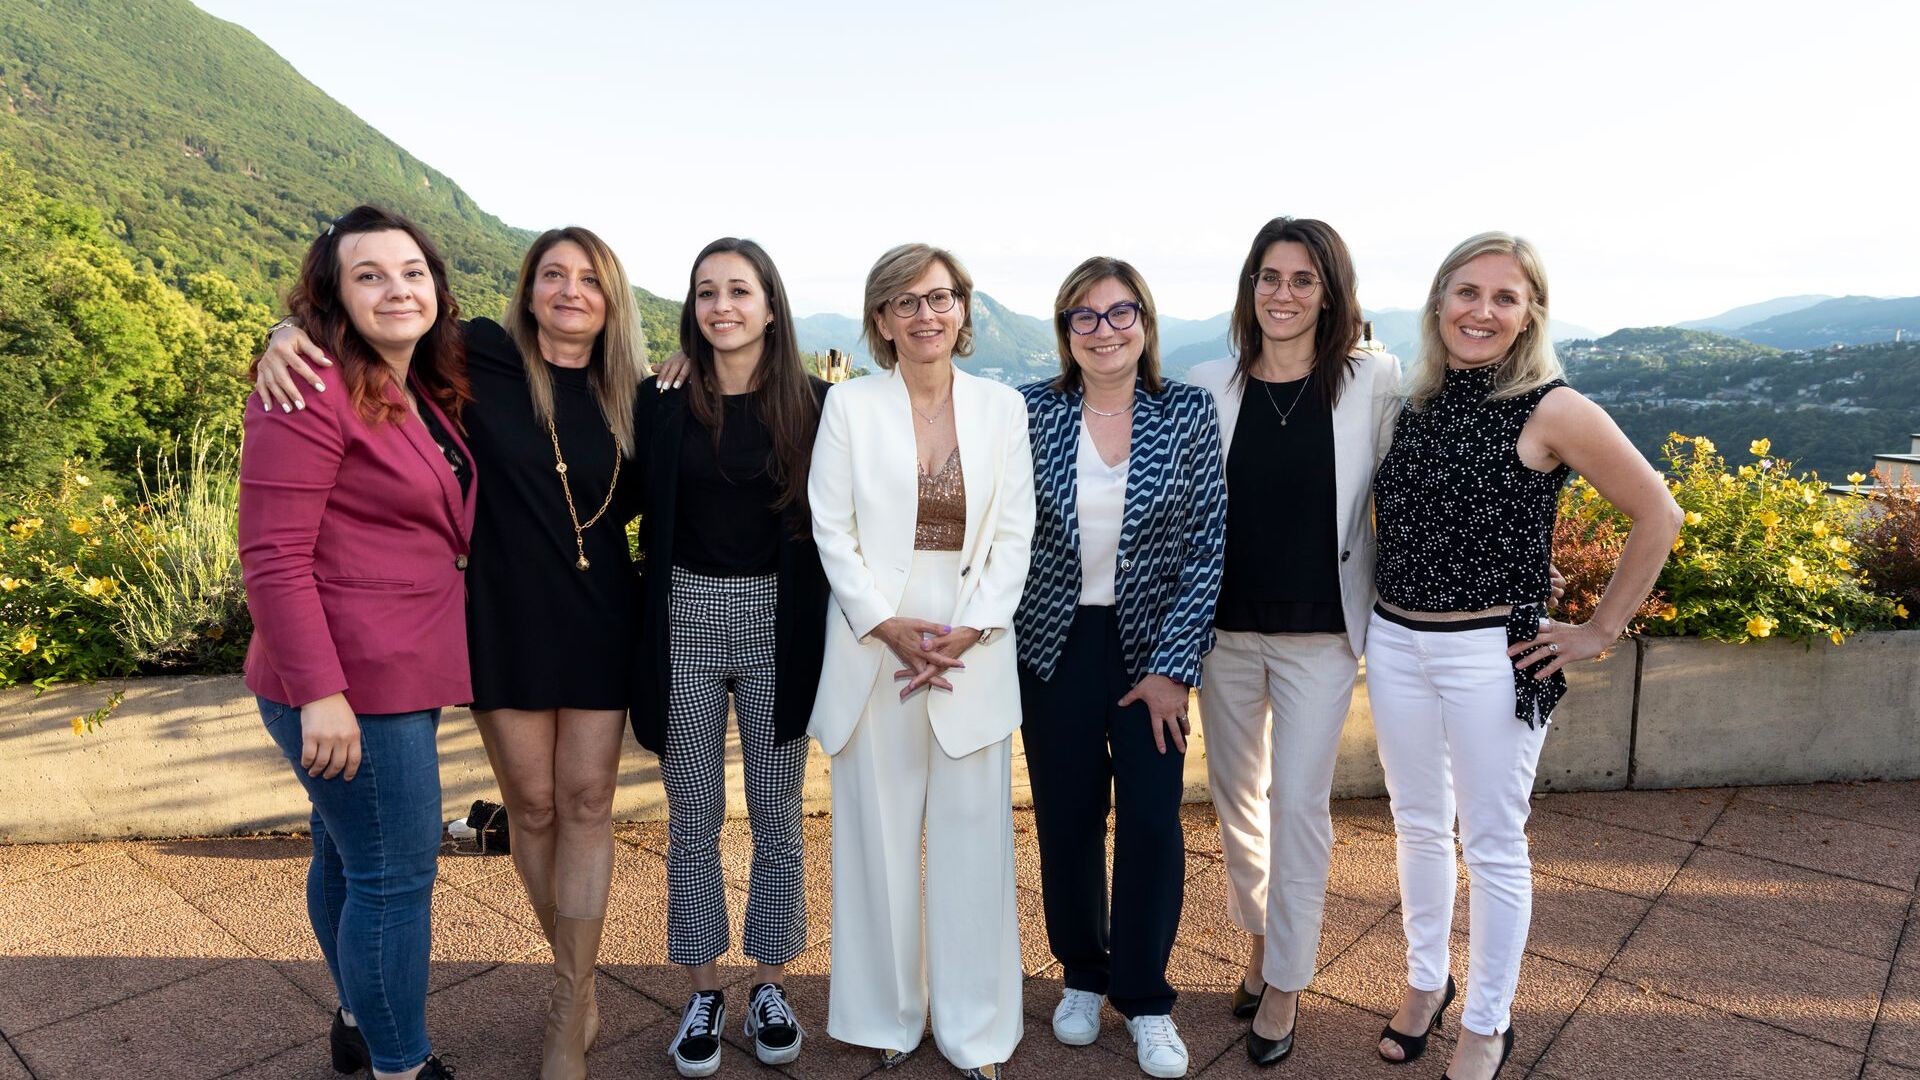 The working staff, almost entirely female, of the ated-ICT Ticino association, led by the new president Cristina Giotto